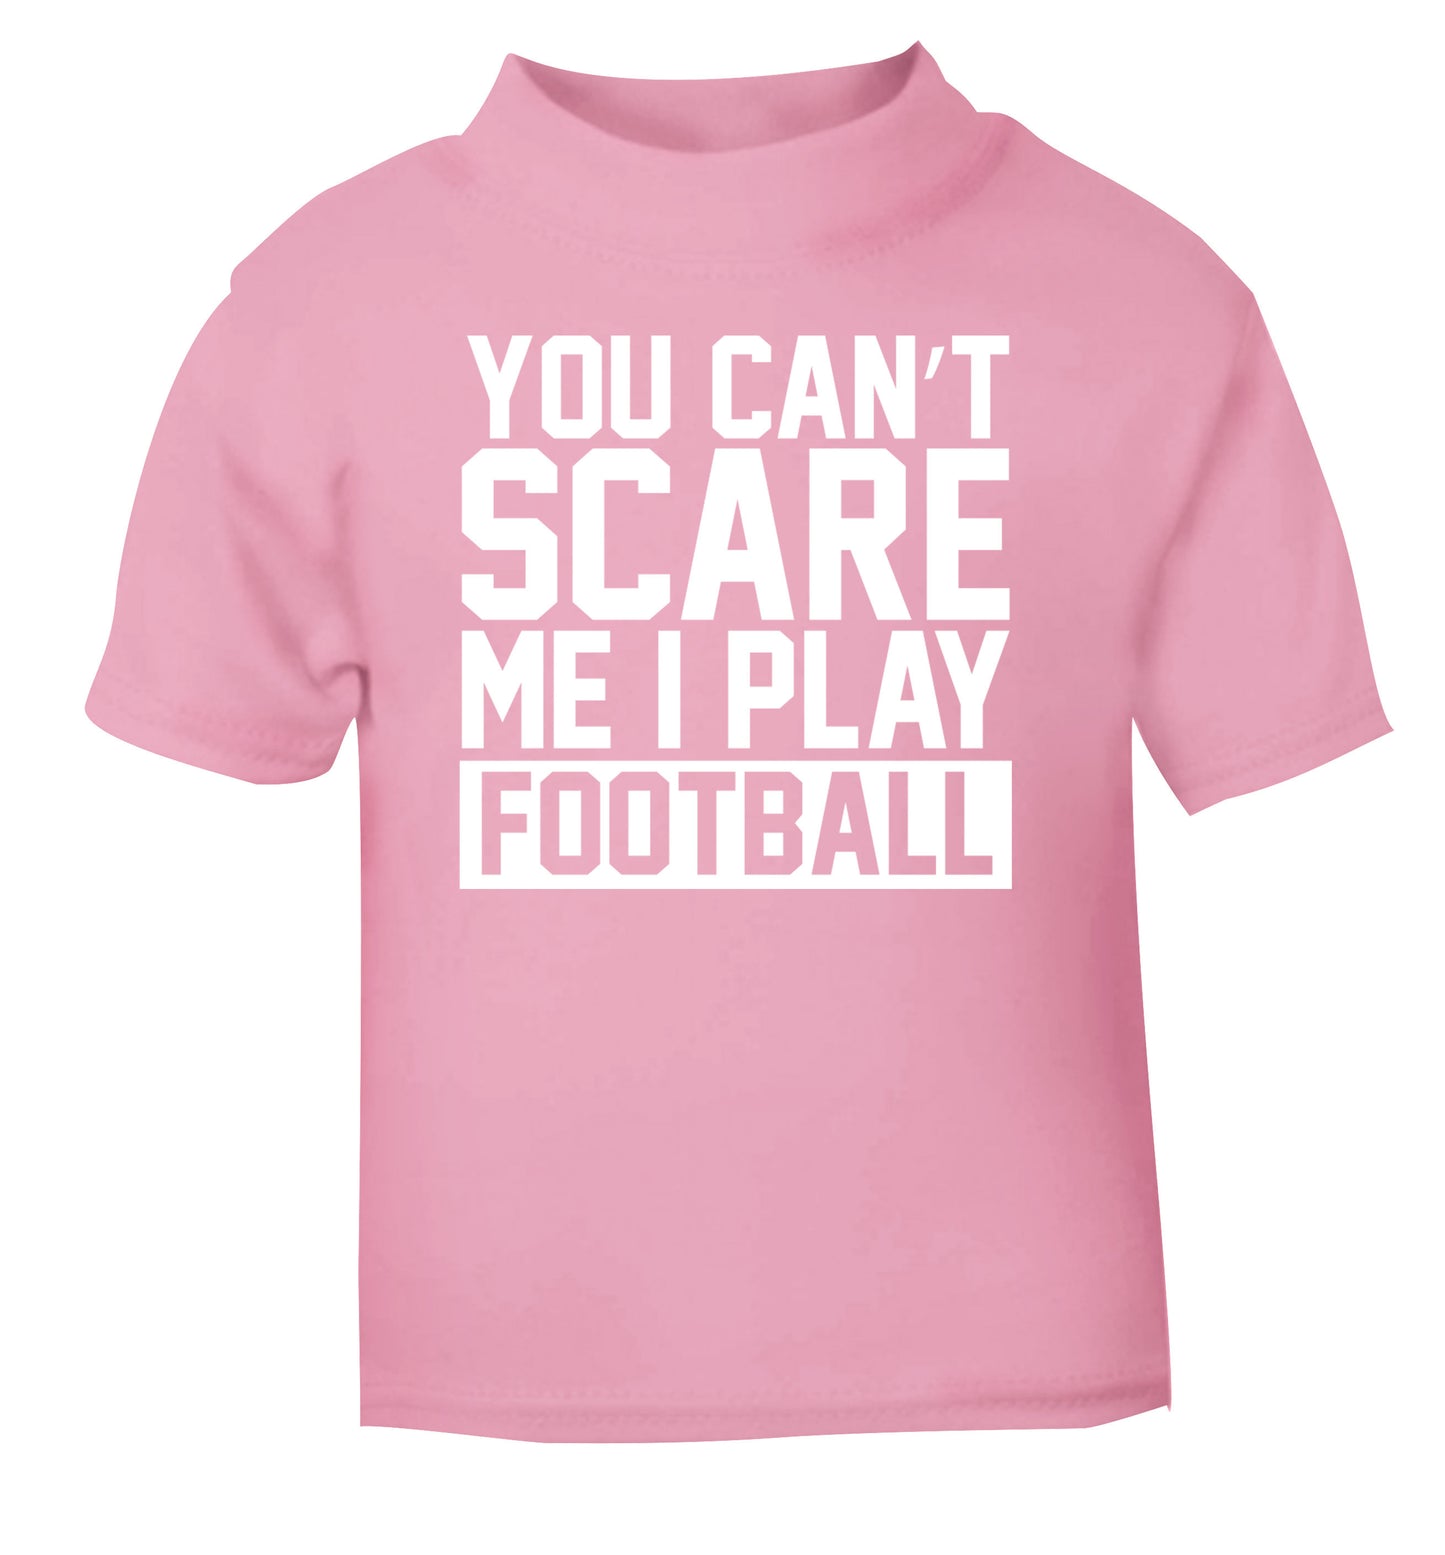 You can't scare me I play football light pink Baby Toddler Tshirt 2 Years